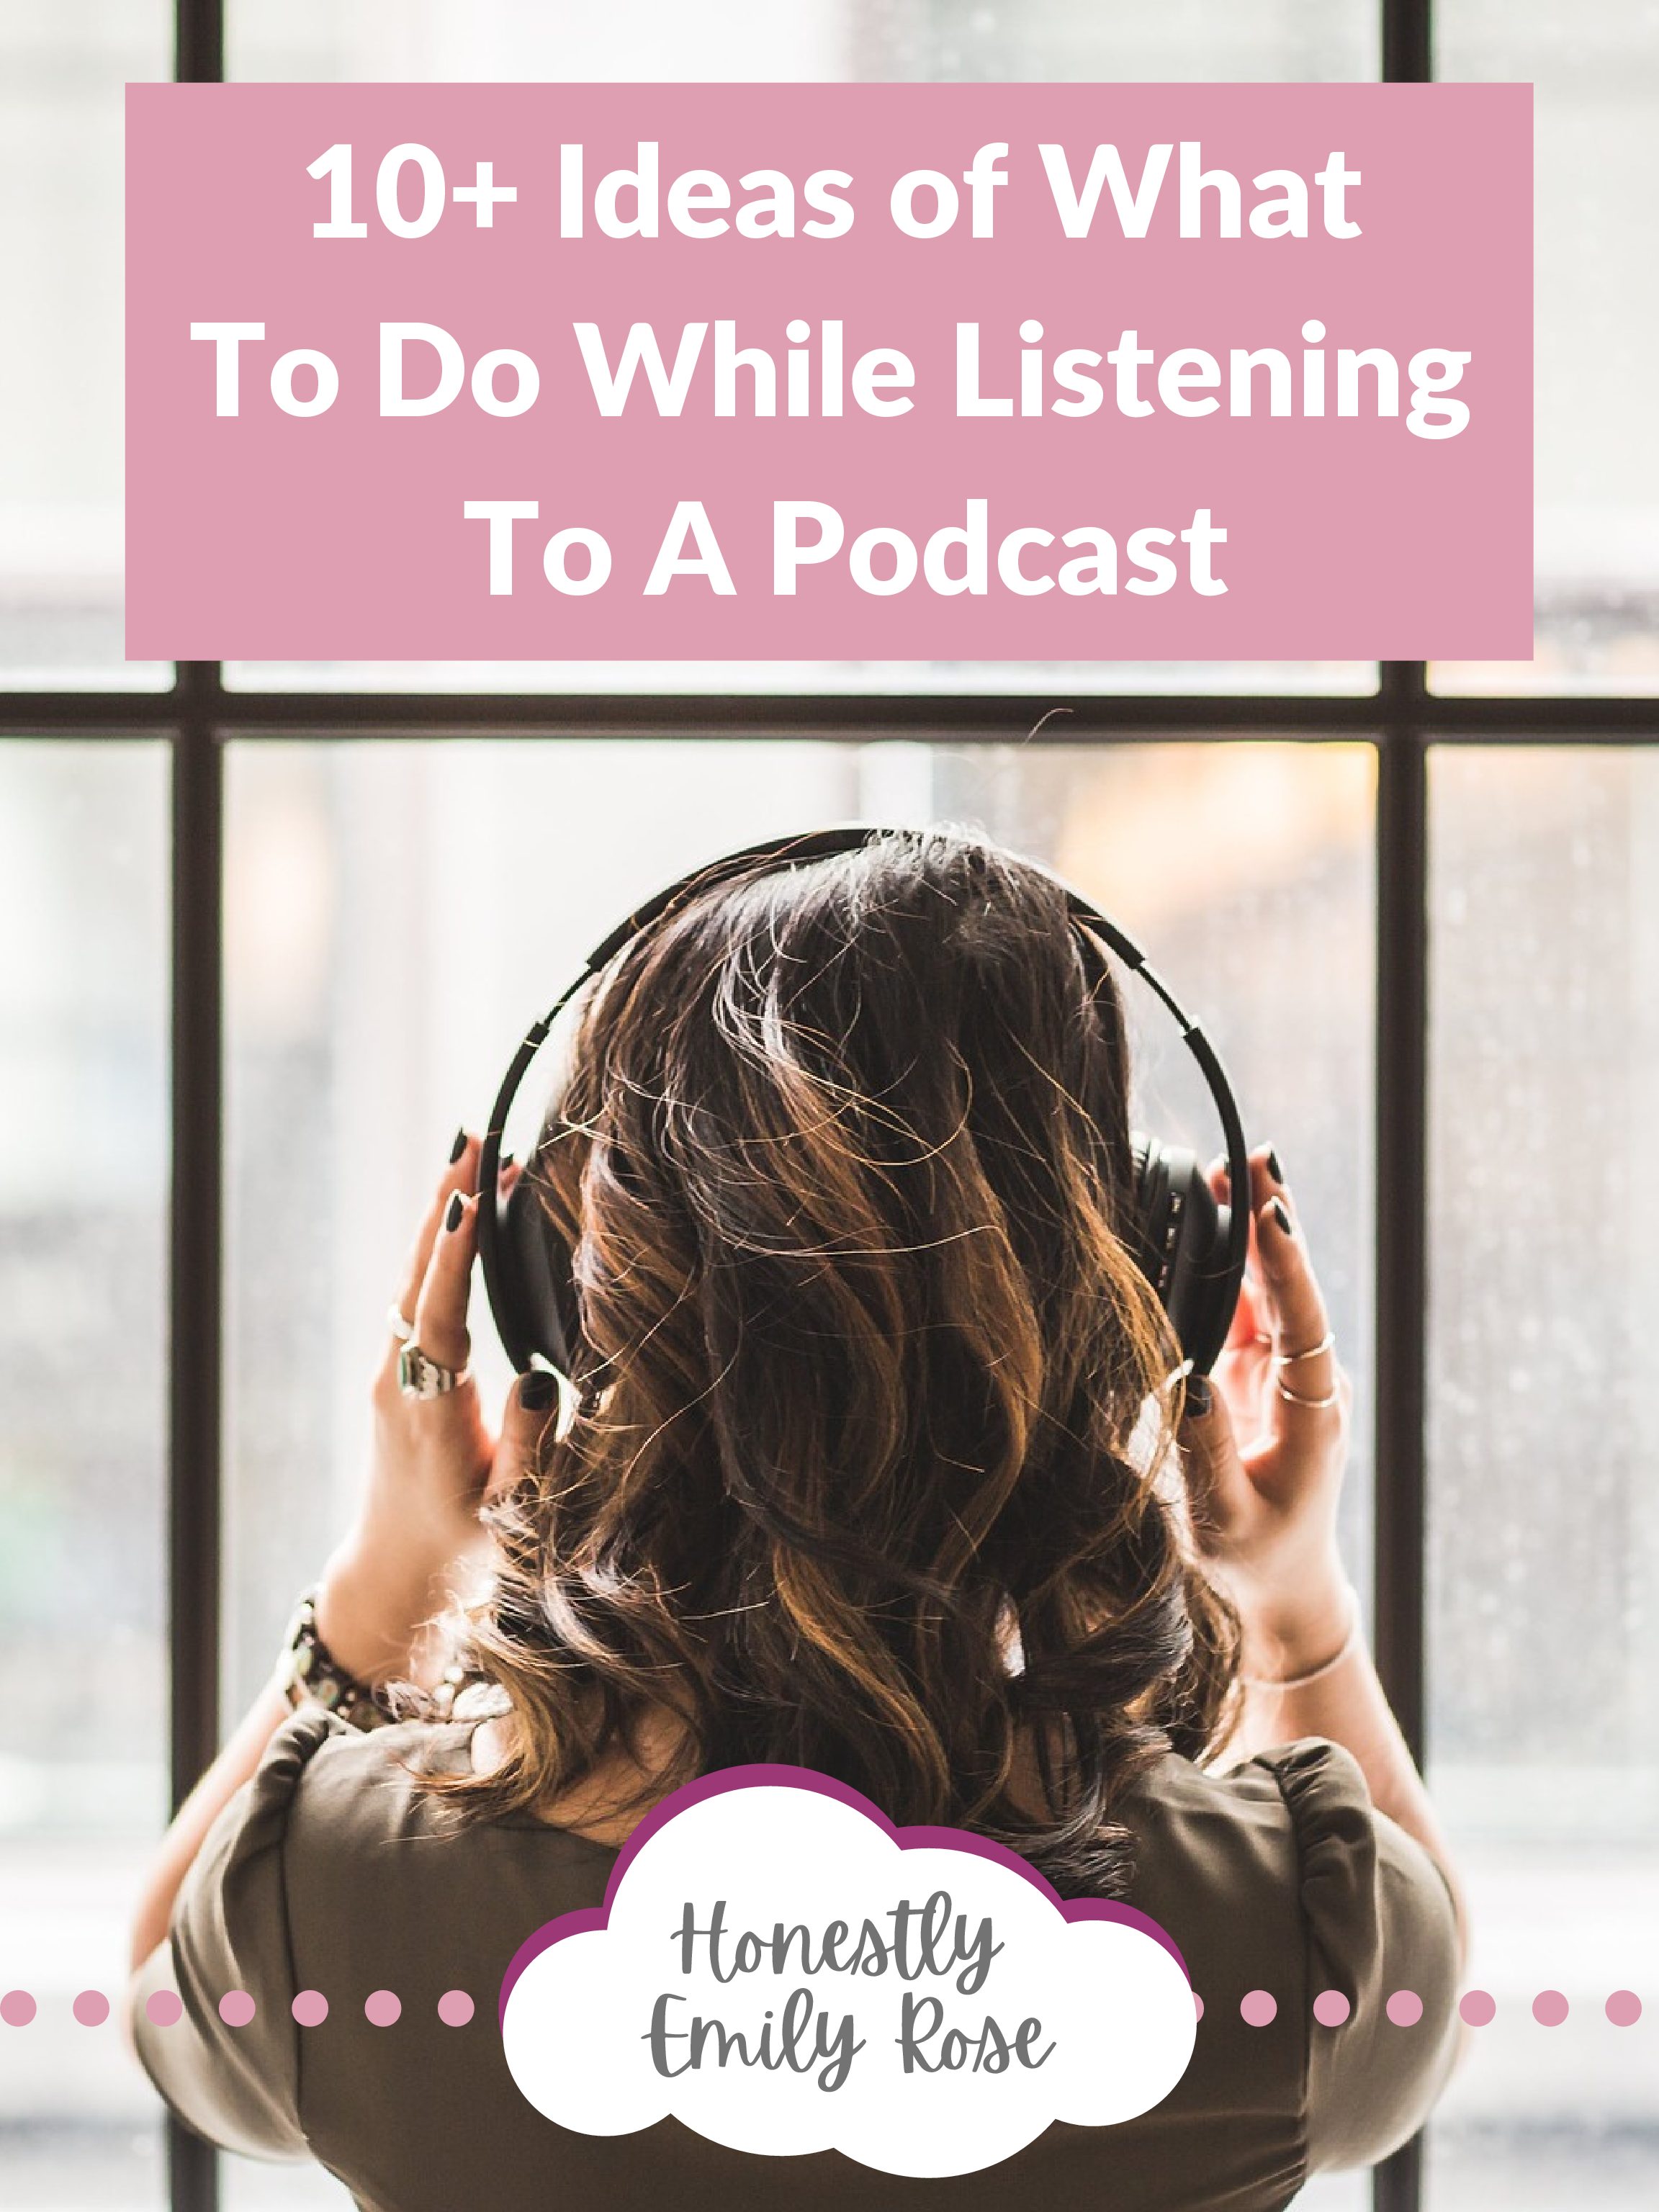 10+ Ideas of What To Do While Listening To A Podcast